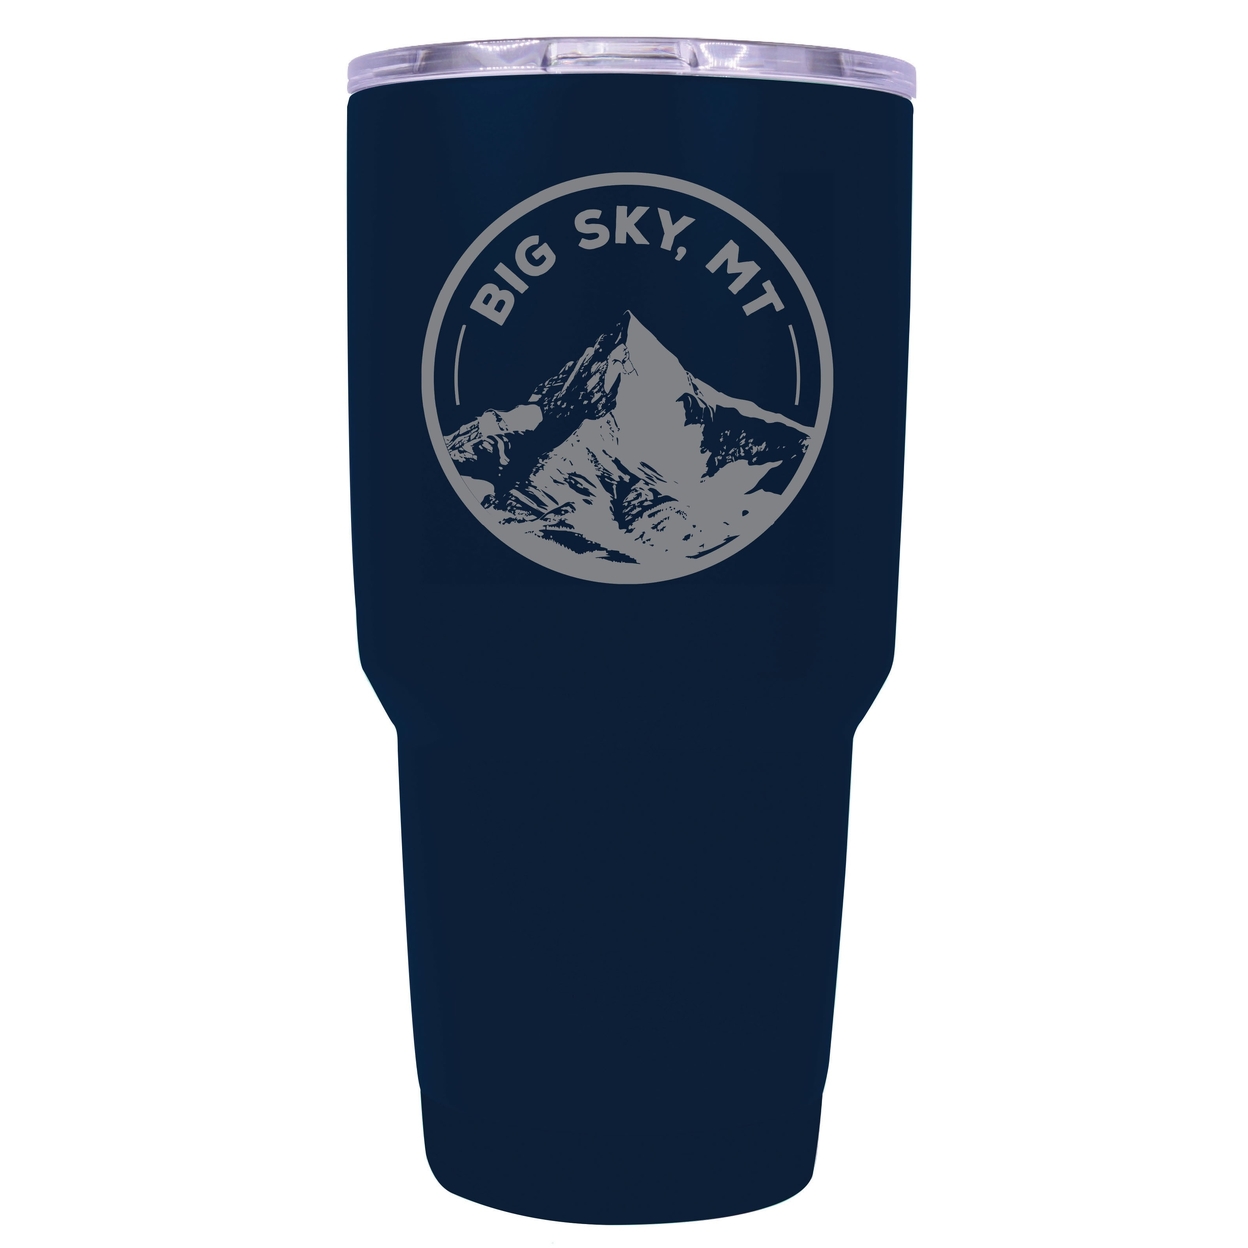 Big Sky Montana Souvenir 24 Oz Engraved Insulated Stainless Steel Tumbler - Navy,,2-Pack